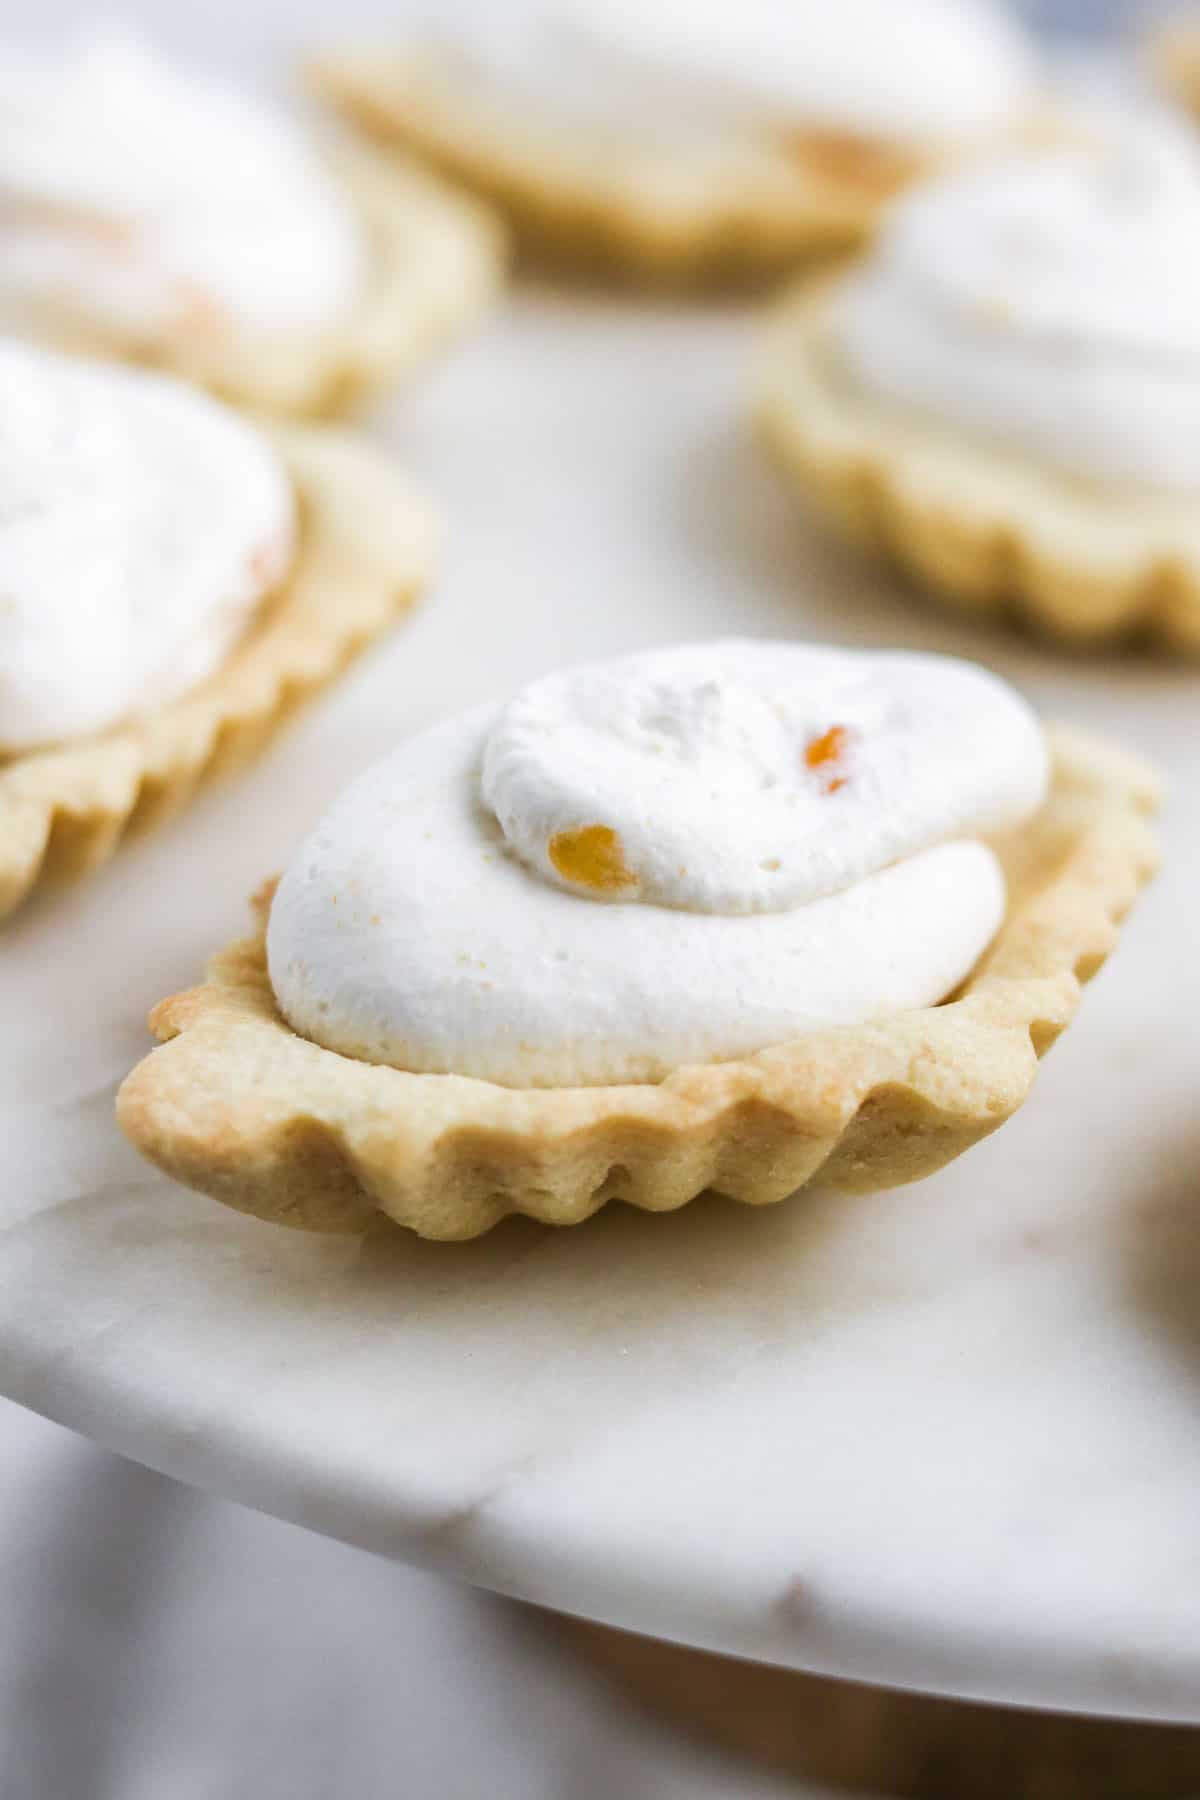 A close up of an almond tart filled with cloudberry cream.